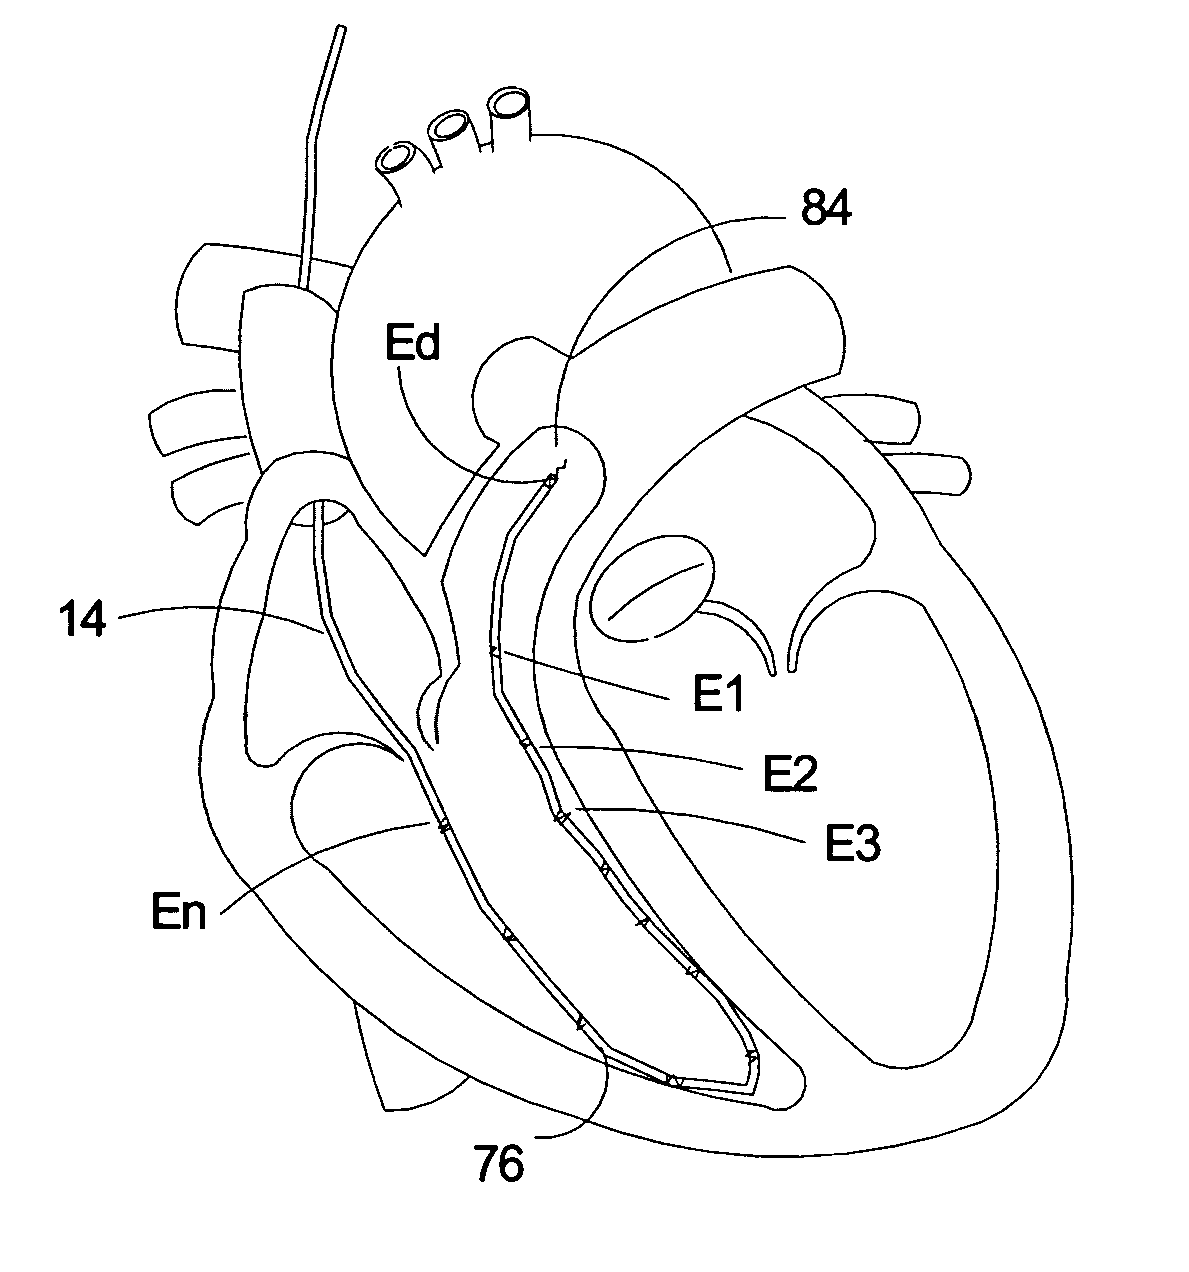 Method for multiple site, right ventricular pacing with improved left ventricular function